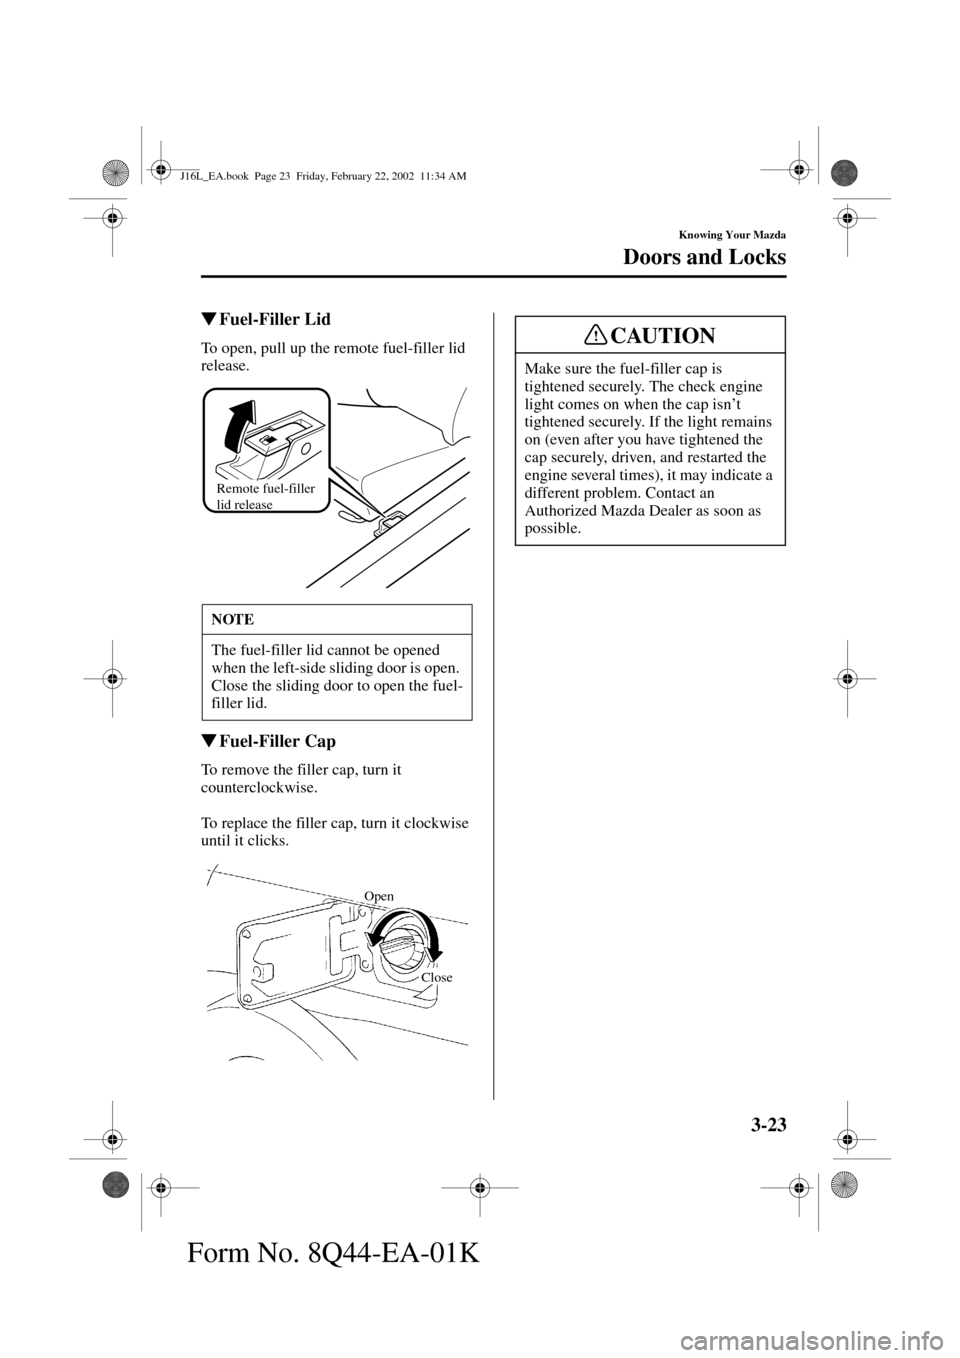 MAZDA MODEL MPV 2002  Owners Manual (in English) 3-23
Knowing Your Mazda
Doors and Locks
Form No. 8Q44-EA-01K
Fuel-Filler Lid
To open, pull up the remote fuel-filler lid 
release.
Fuel-Filler Cap
To remove the filler cap, turn it 
counterclockwise